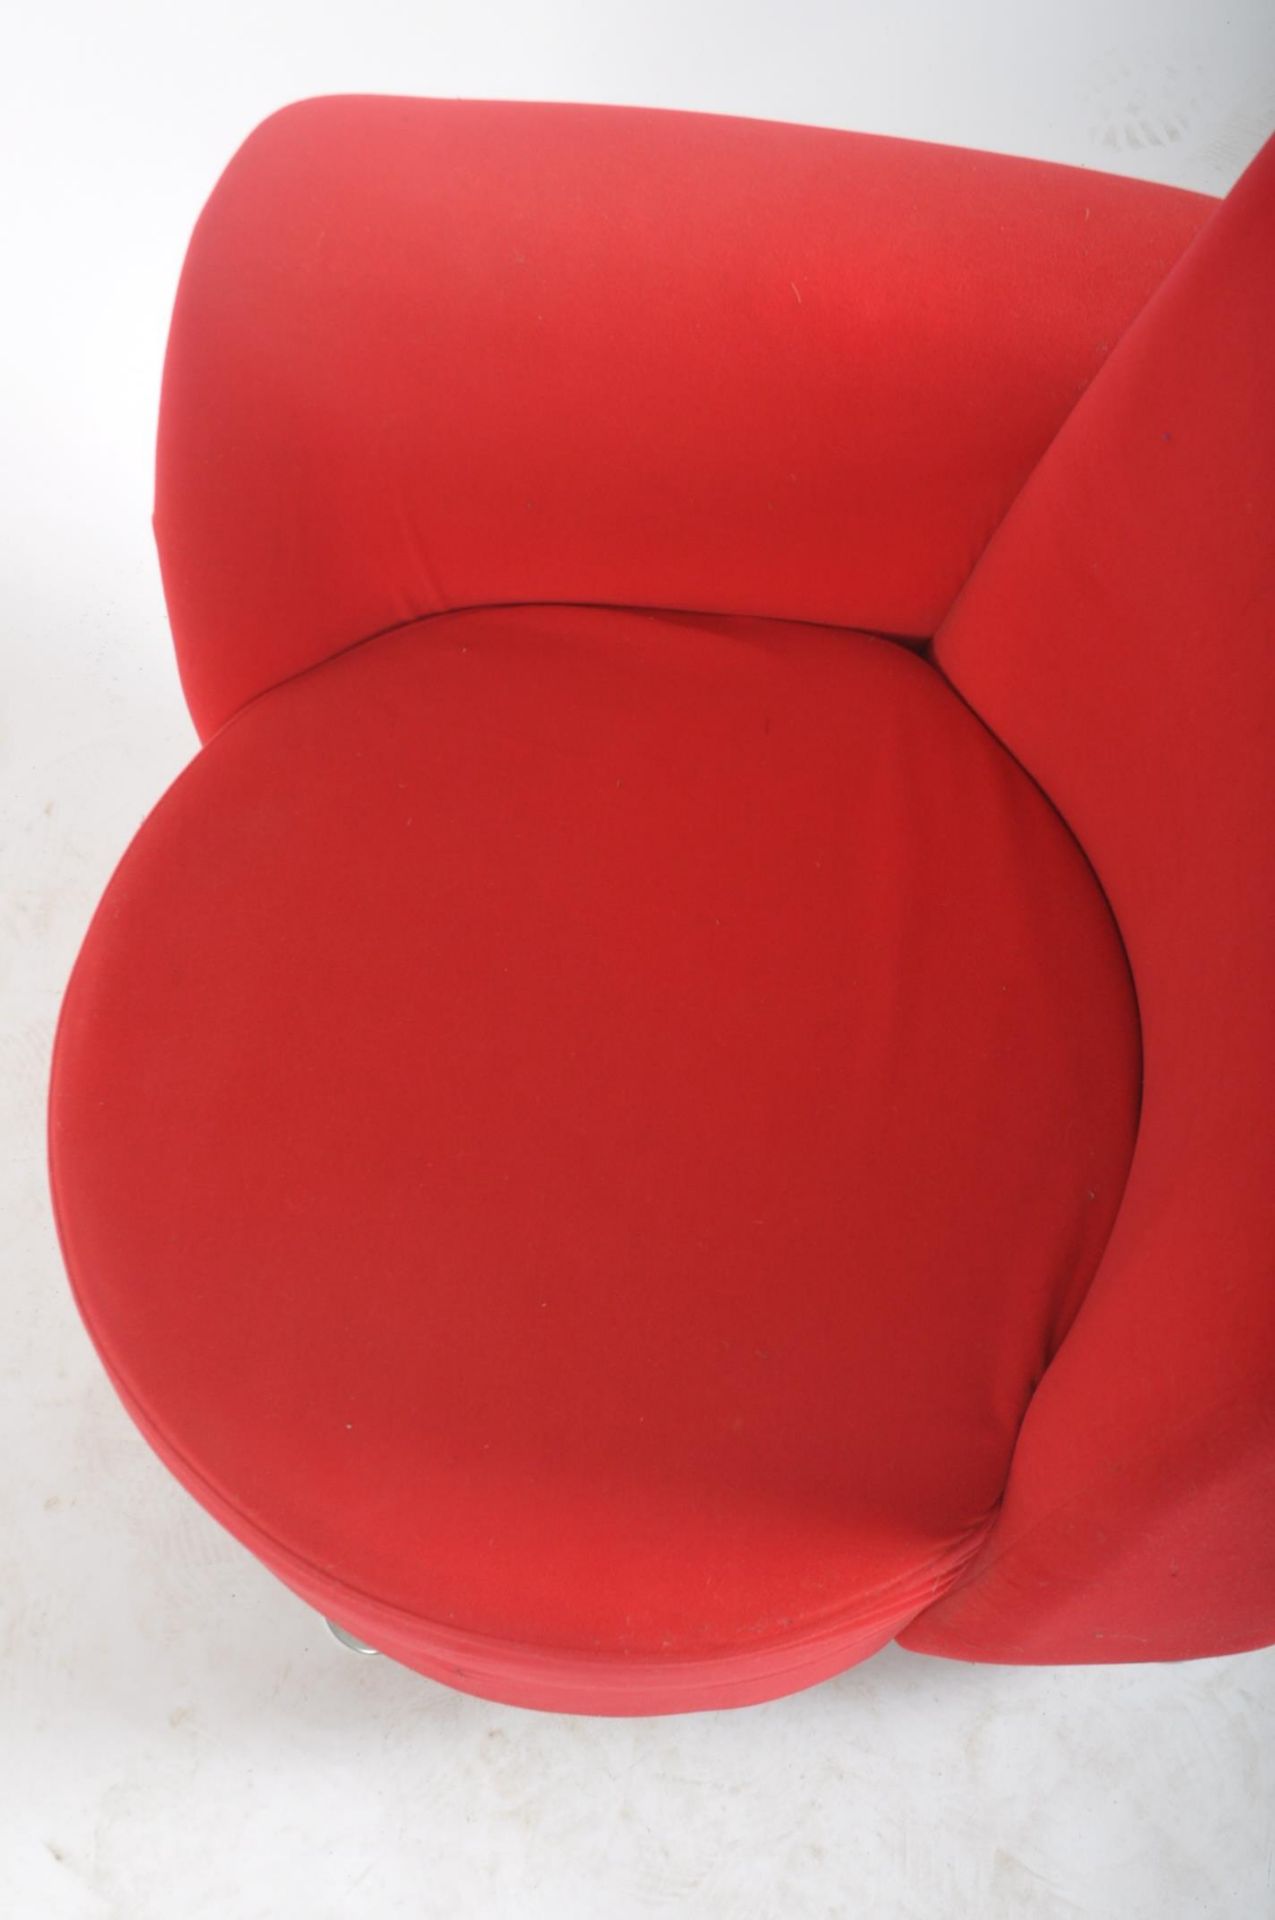 POTENZA CHAIR - CONTEMPORARY HIGH BACK ARMCHAIR - Image 6 of 7